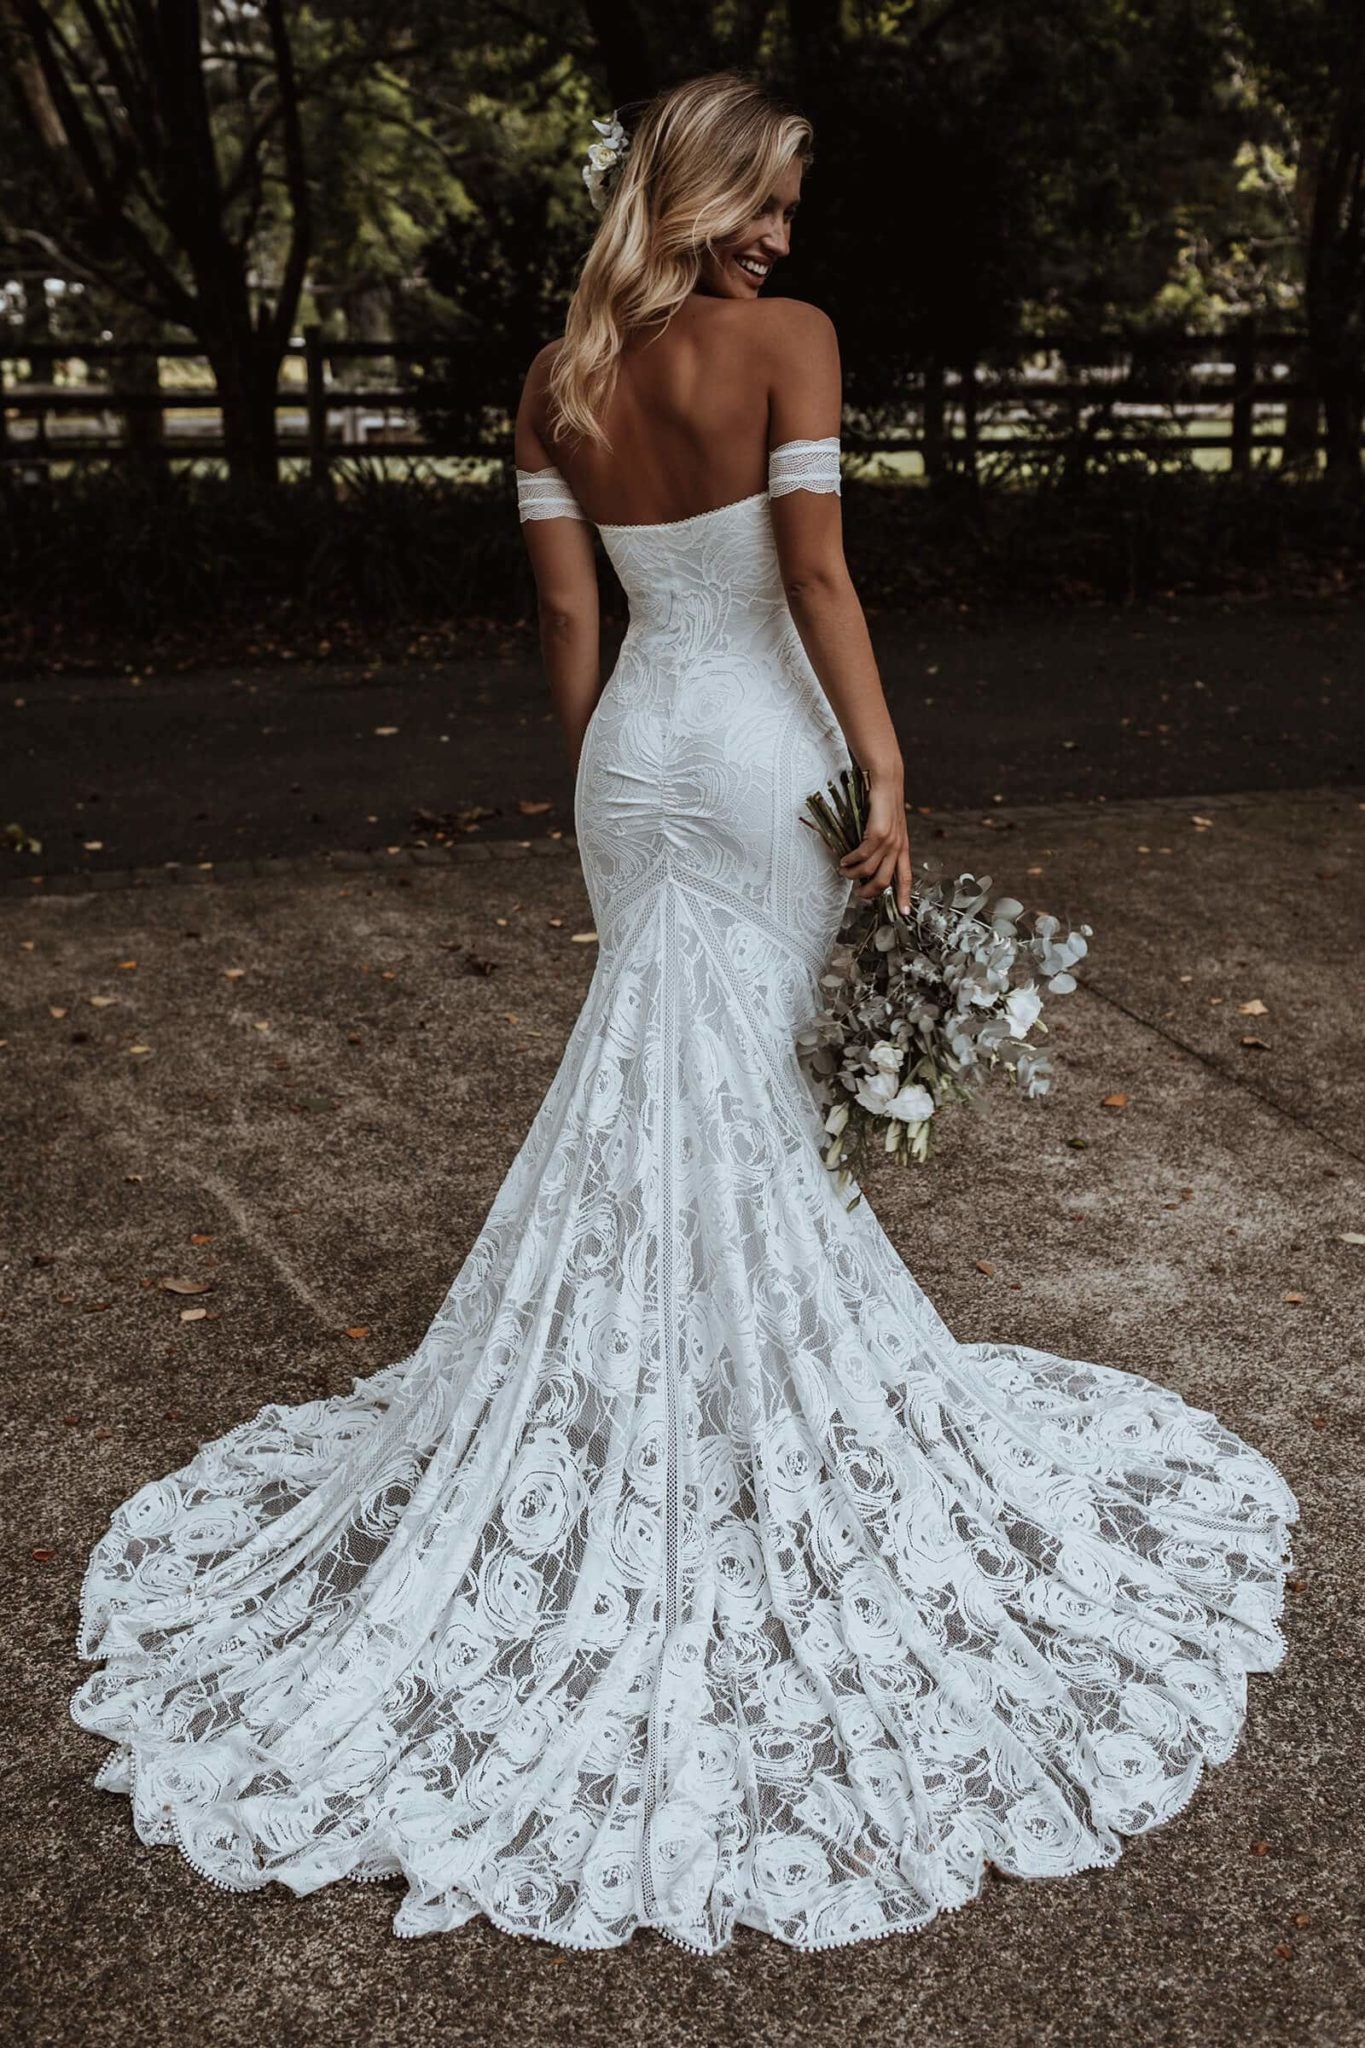 The Best Wedding Dress Bra Styles for Every Type of Bridal Gown